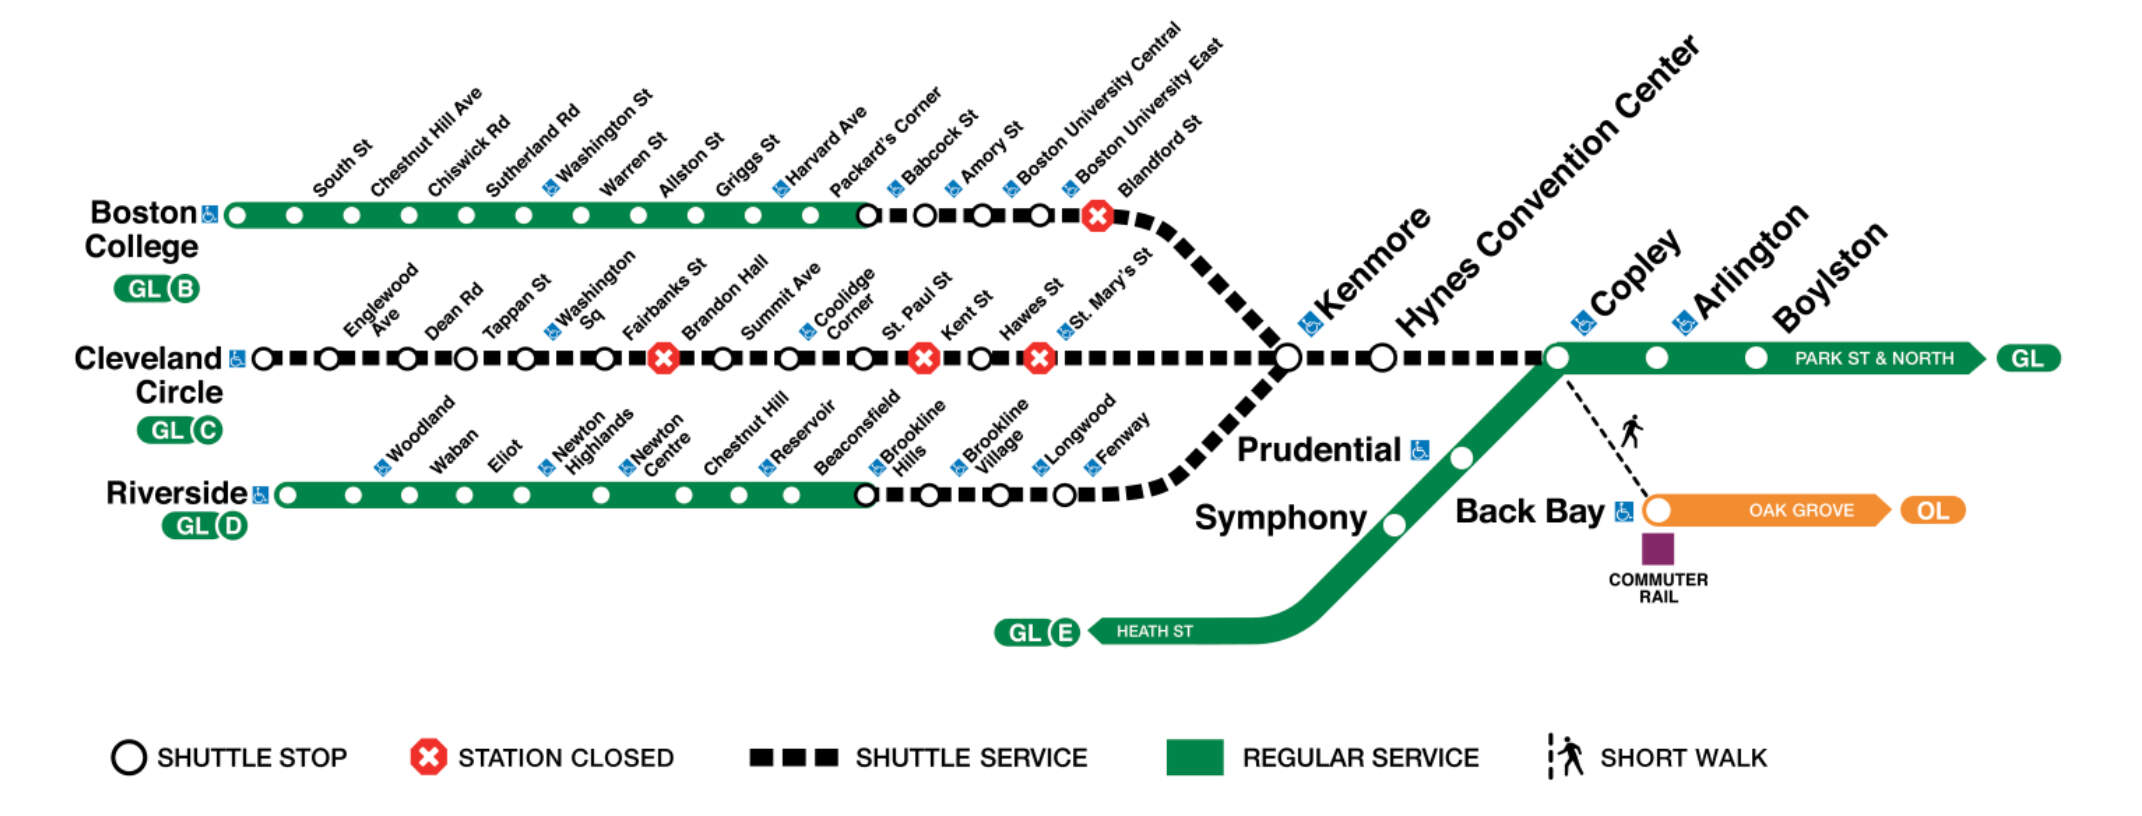 Green Line closures start this week. Here are some alternative travel options.